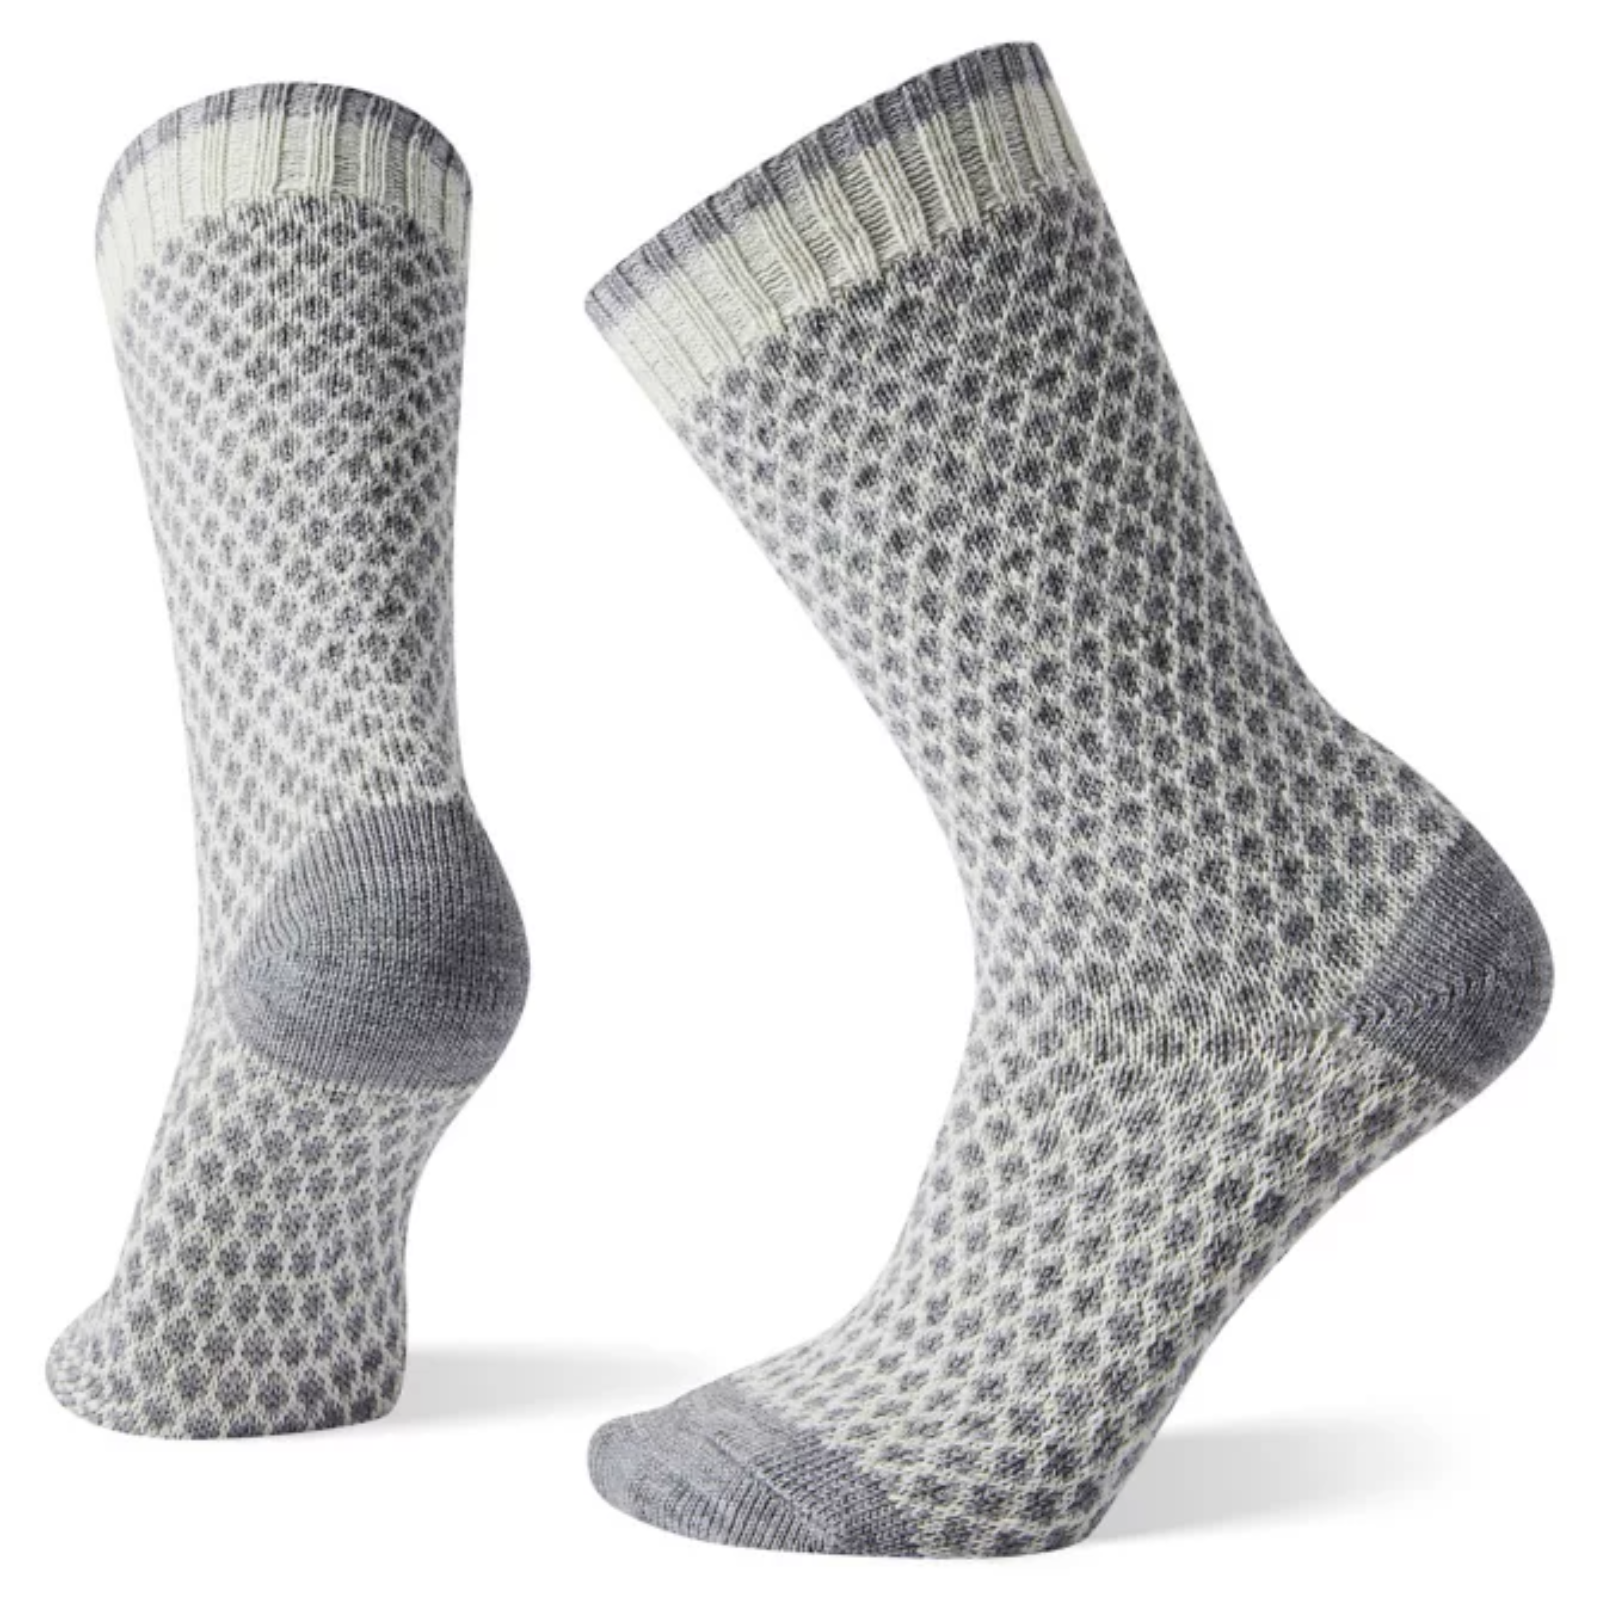 Smartwool Popcorn Polka Dot Crew women's sock featuring white and gray pattern all over with gray toes and heel. Socks shown on display feet. 